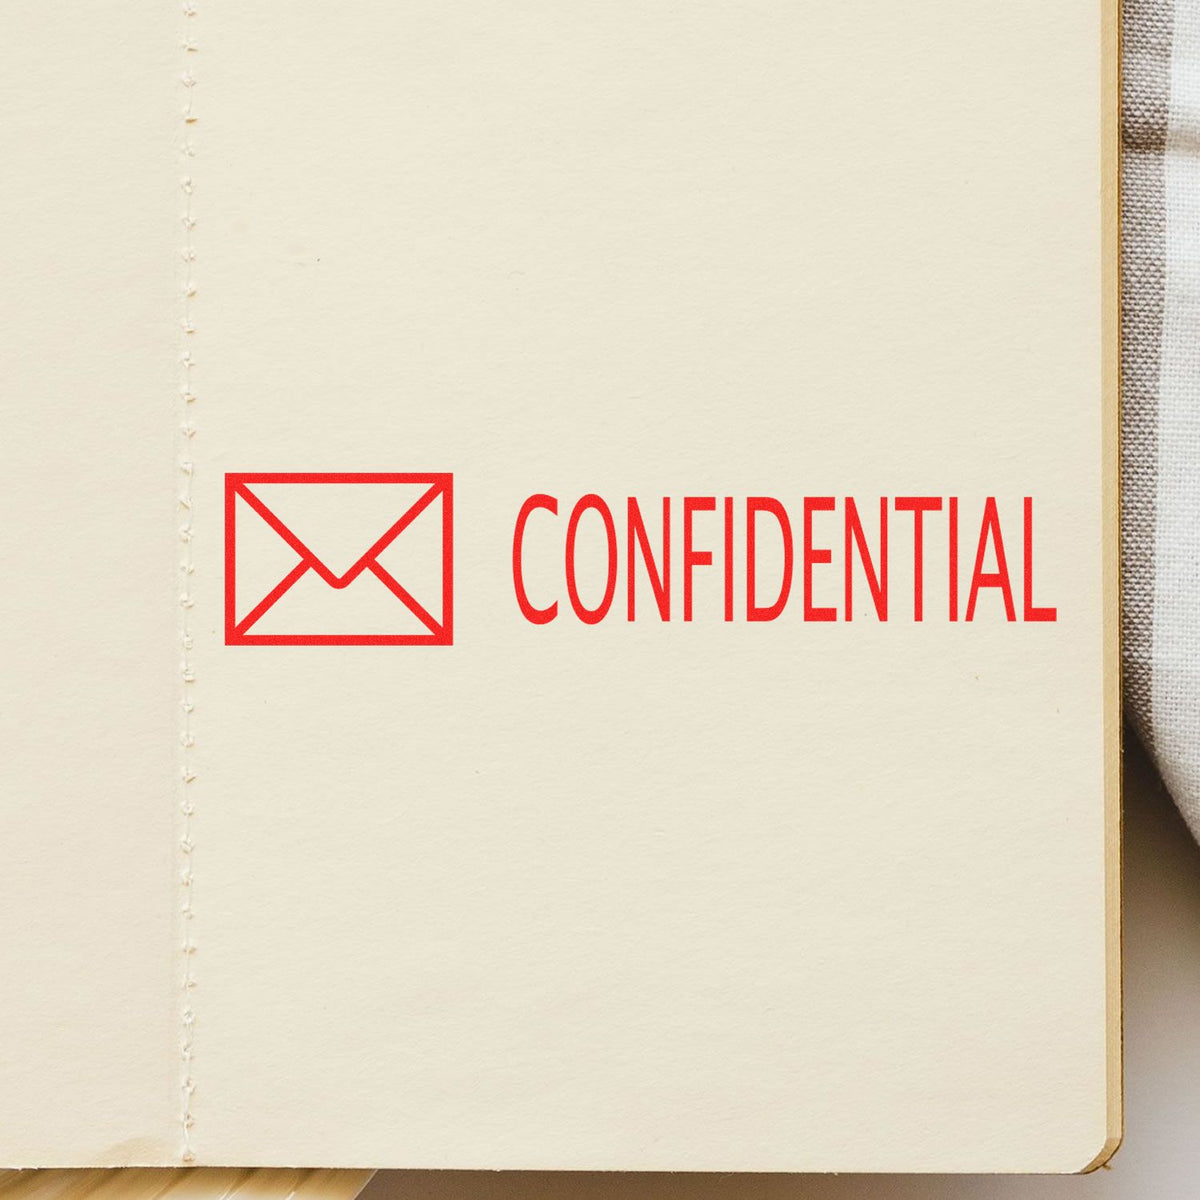 Large Pre-Inked Confidential with Envelope Stamp In Use Photo